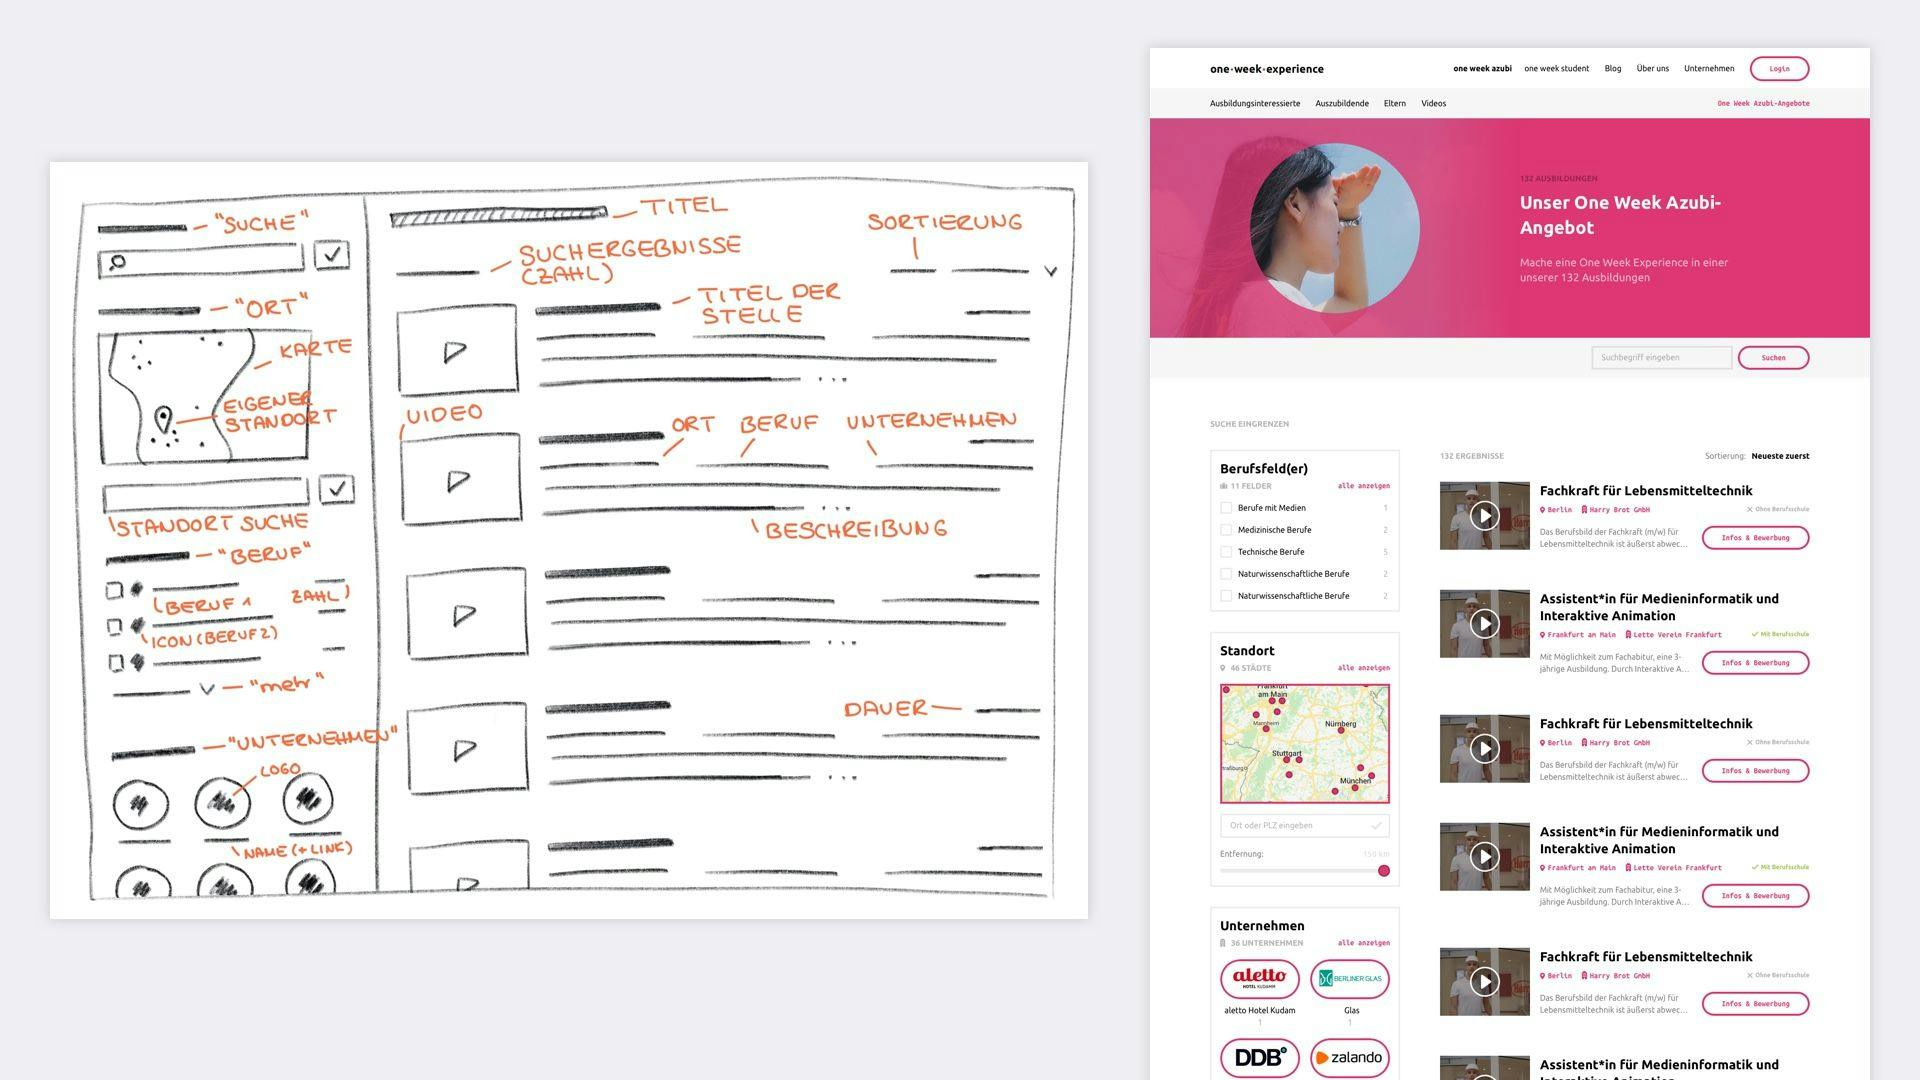 On the left a wireframe and on the right one of the drafts in Sketch of the apprenticeships